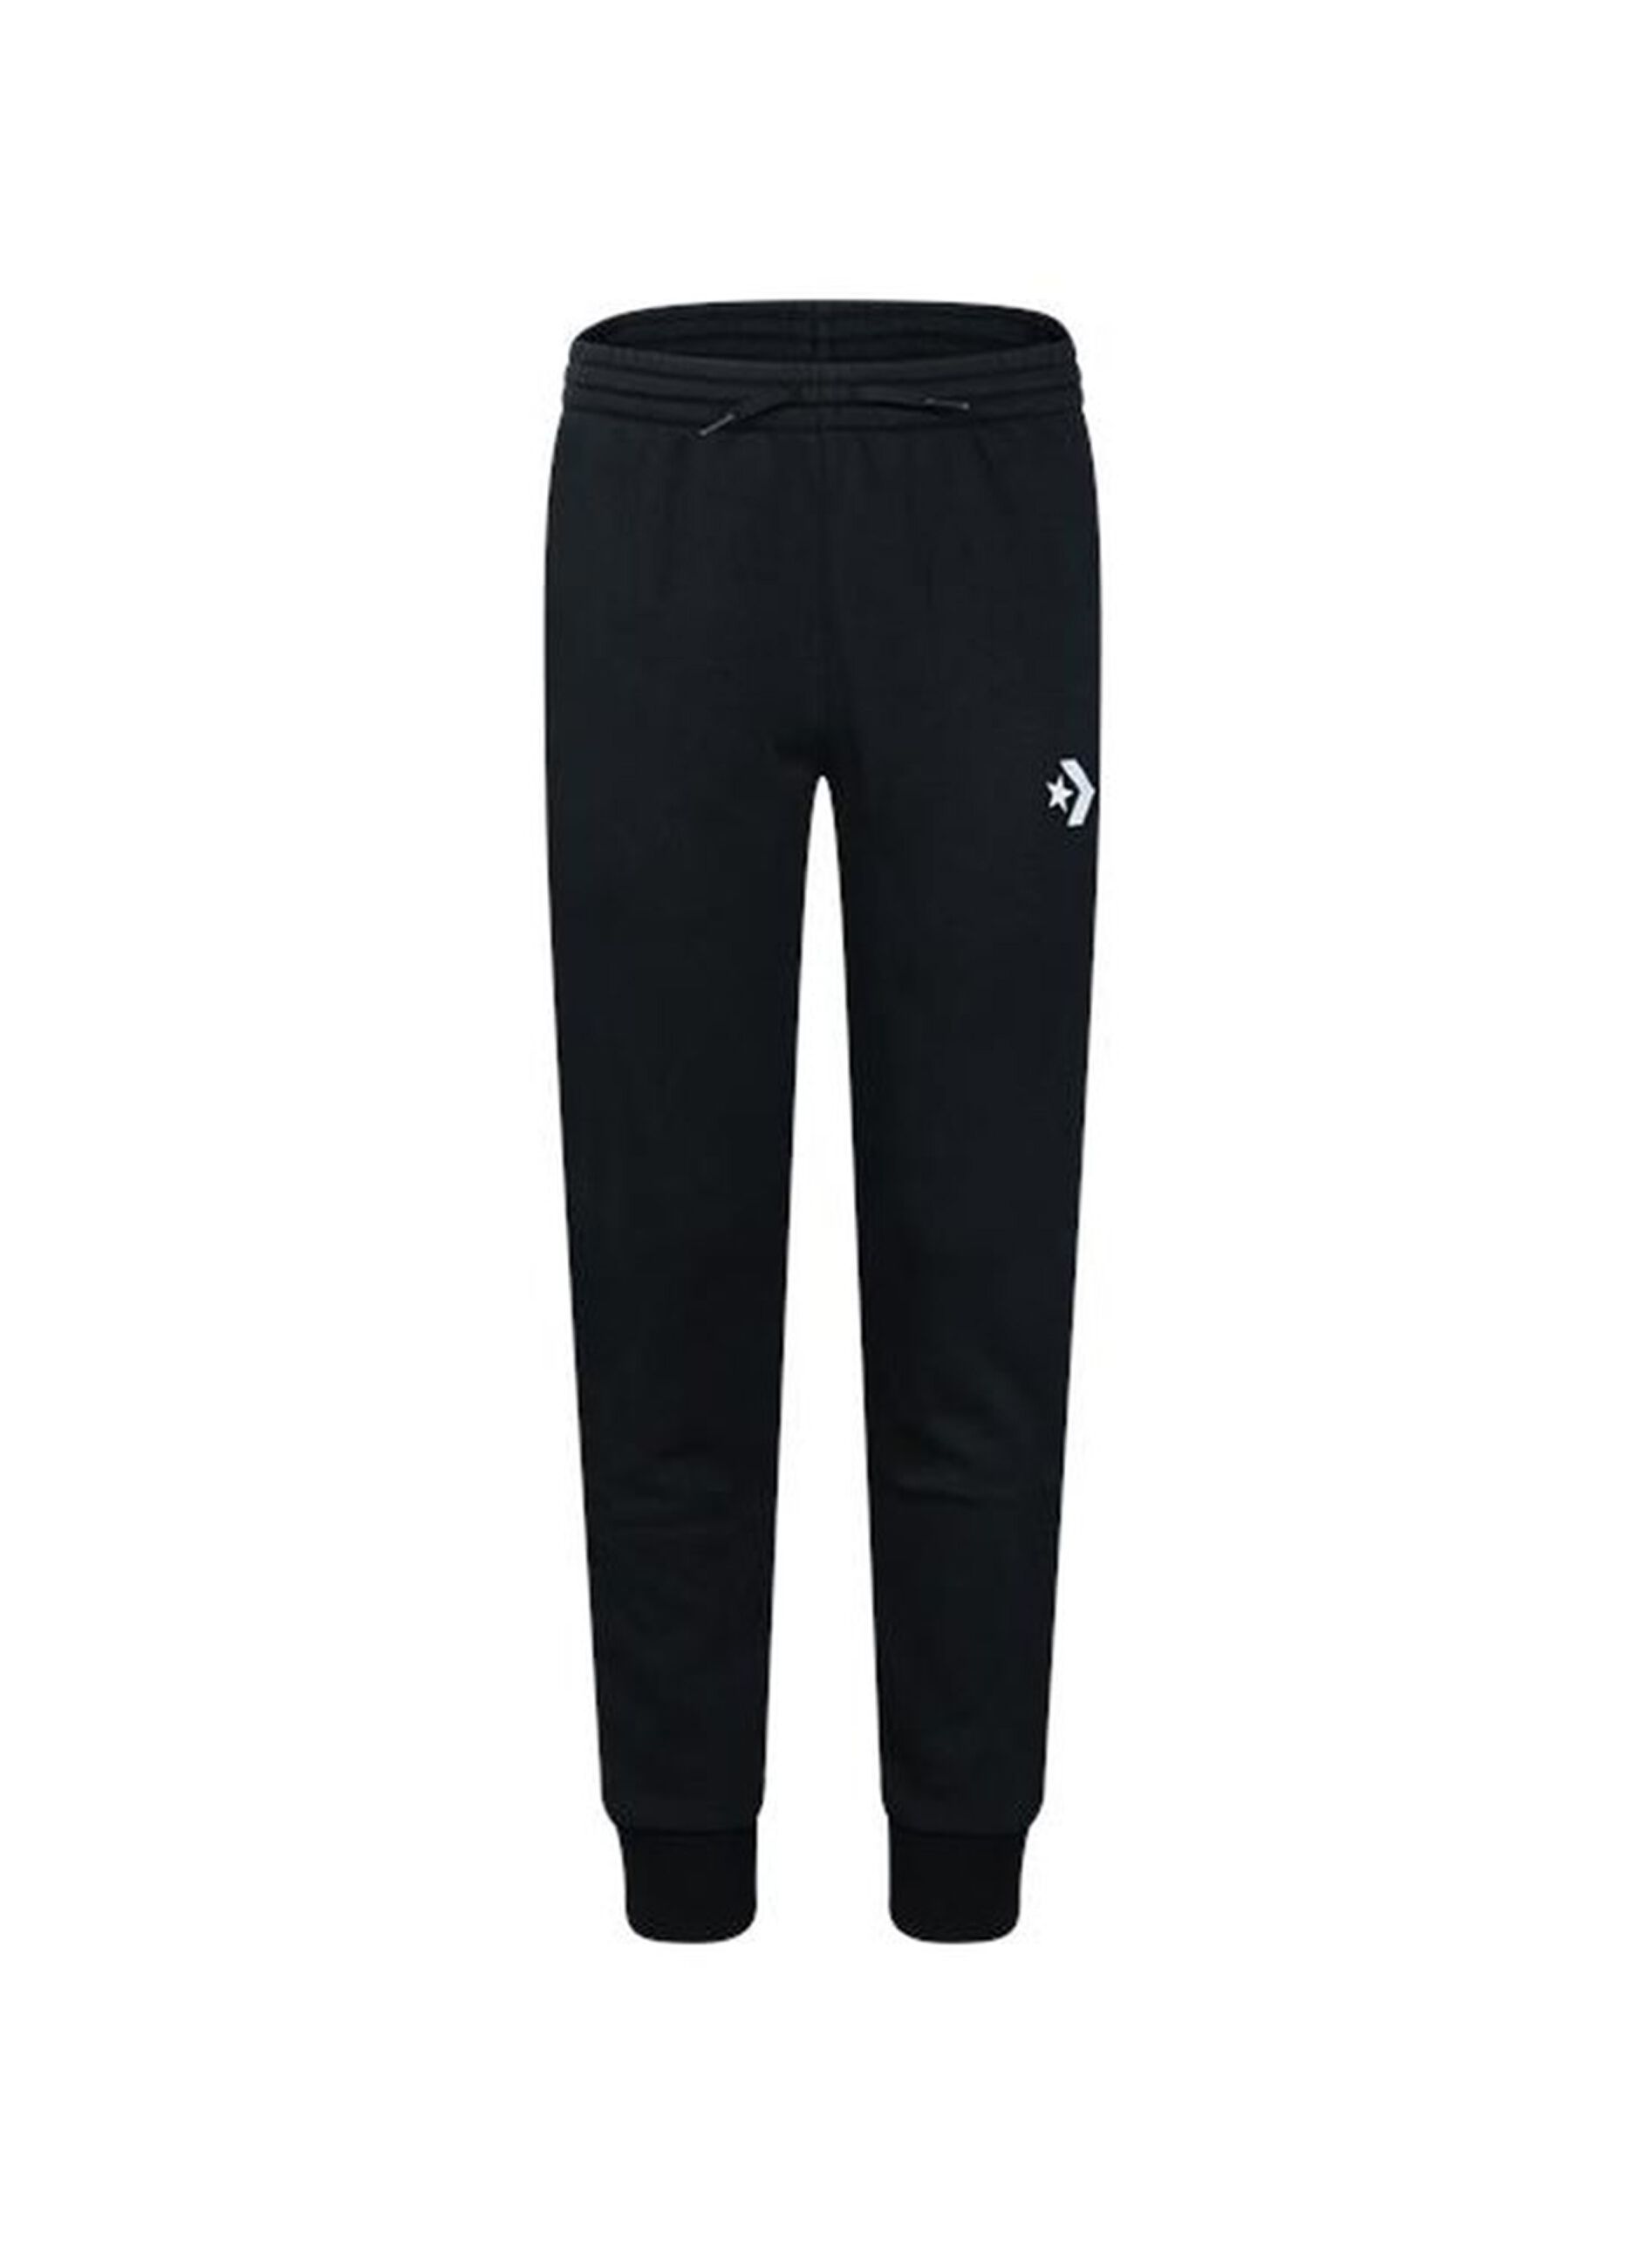 Joggers in fleece with All Star logo